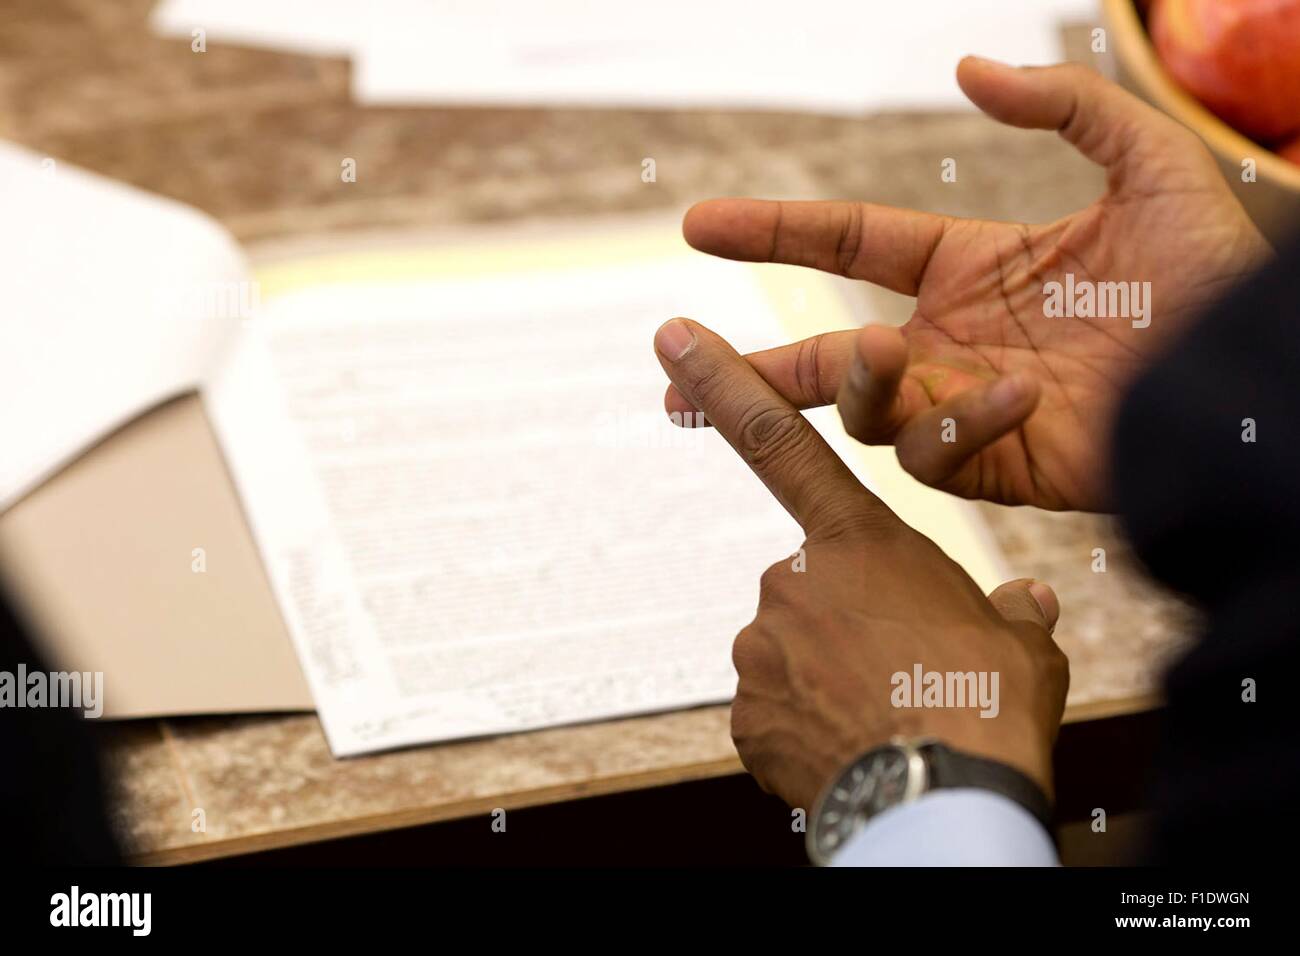 U.S. President Barack Obama hand gestures during State of the Union prep in the Oval Office of the White House January 14, 2015 in Washington, DC. Stock Photo